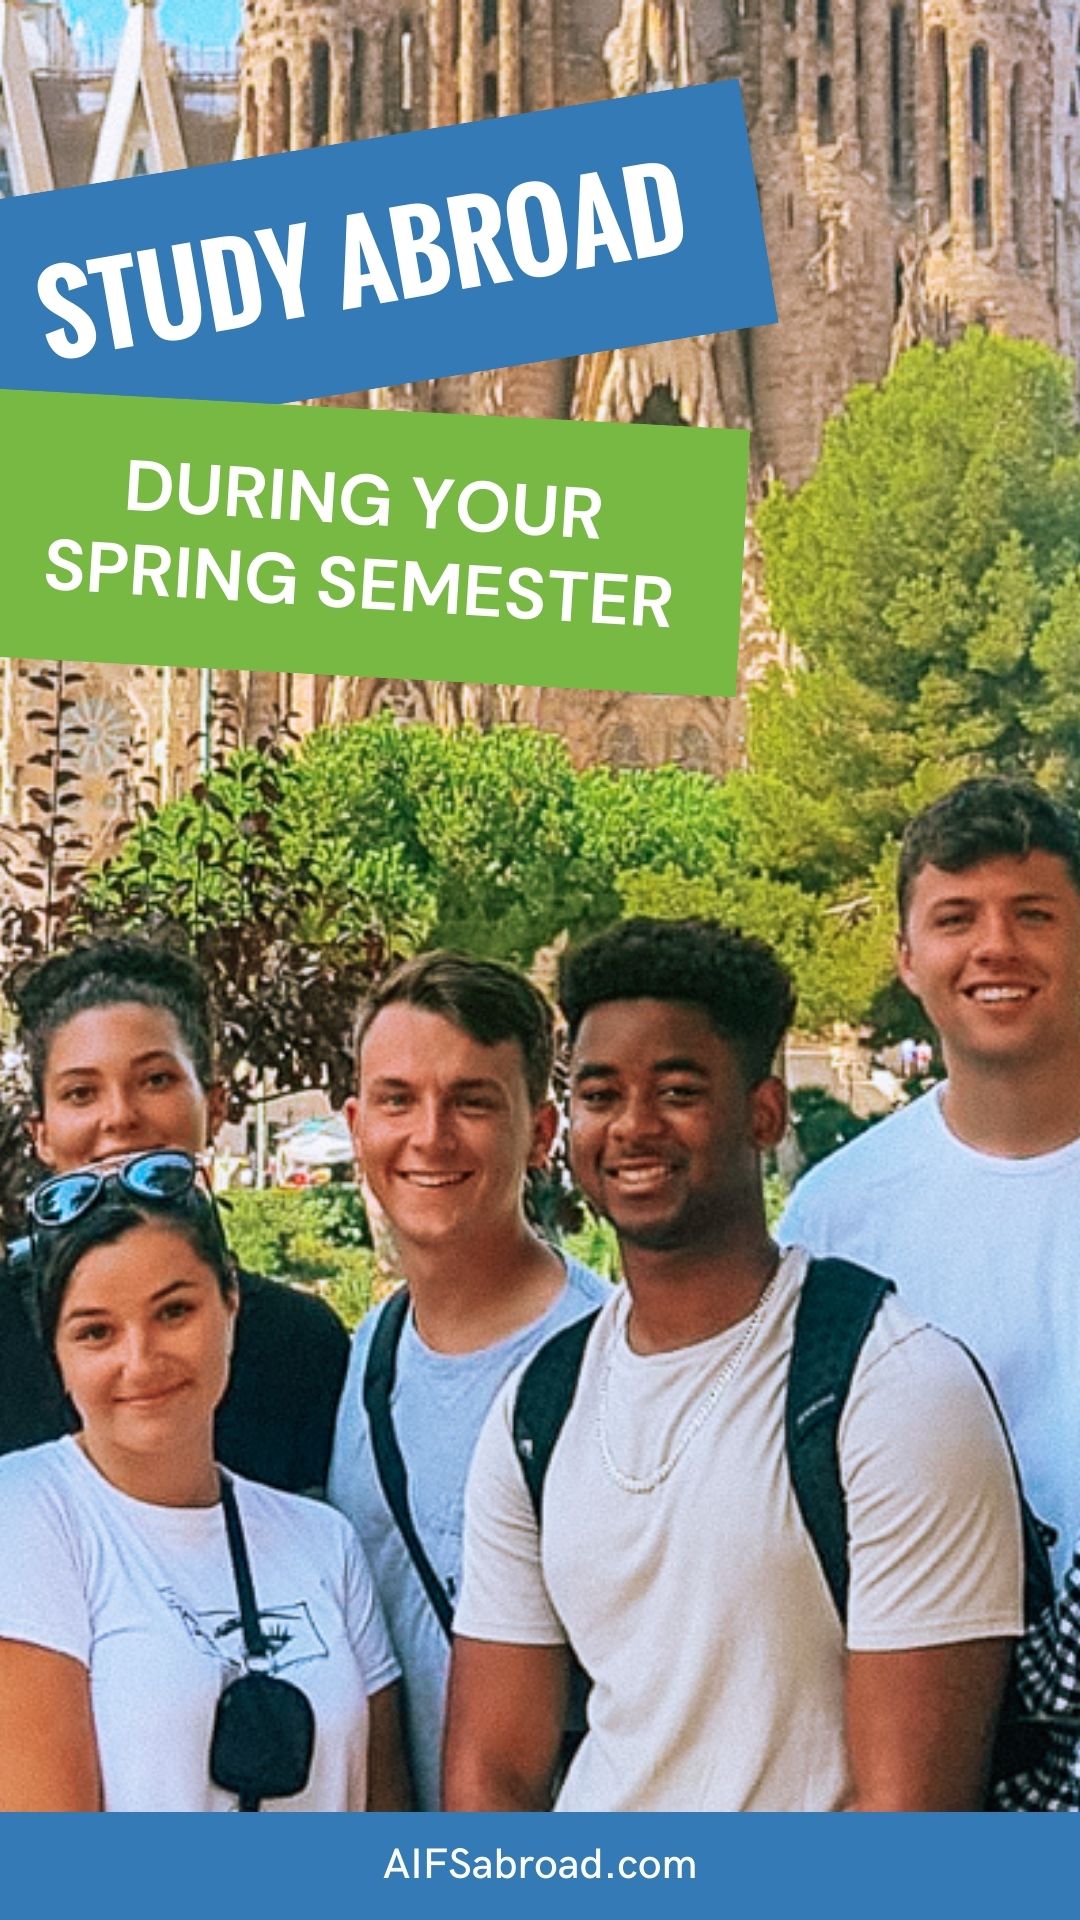 Study abroad during your spring semester with AIFS Abroad